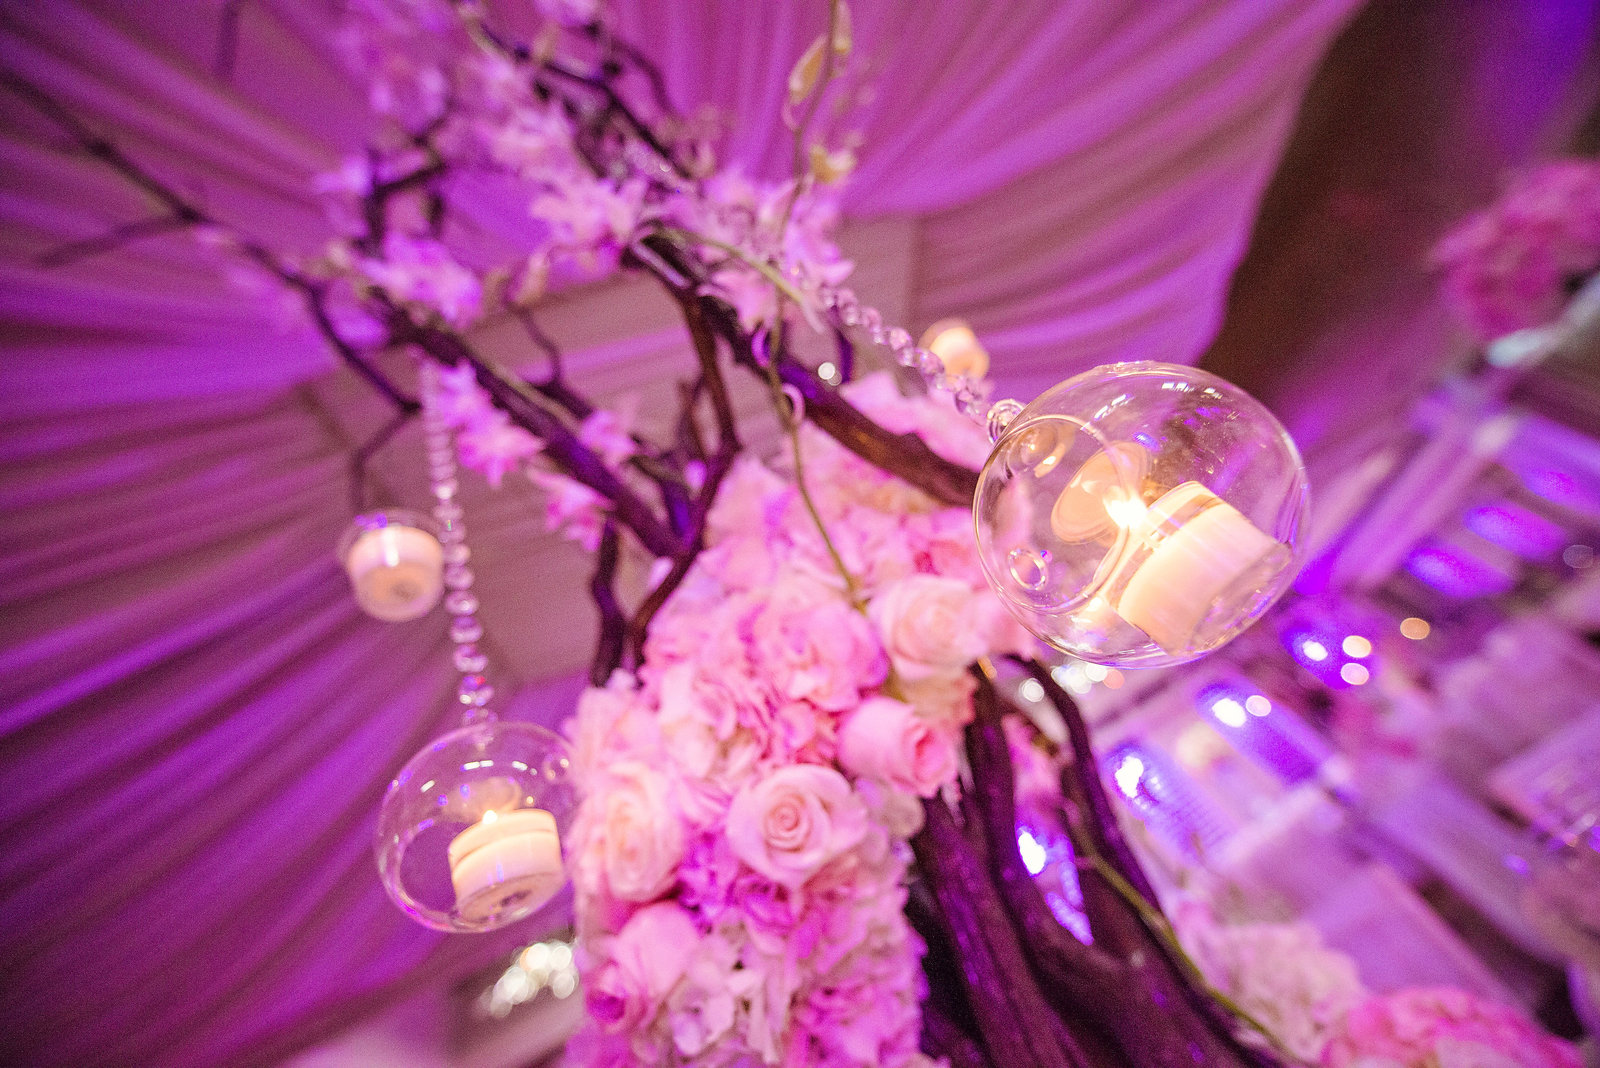 Luxurious wedding decor from Chateau Briand